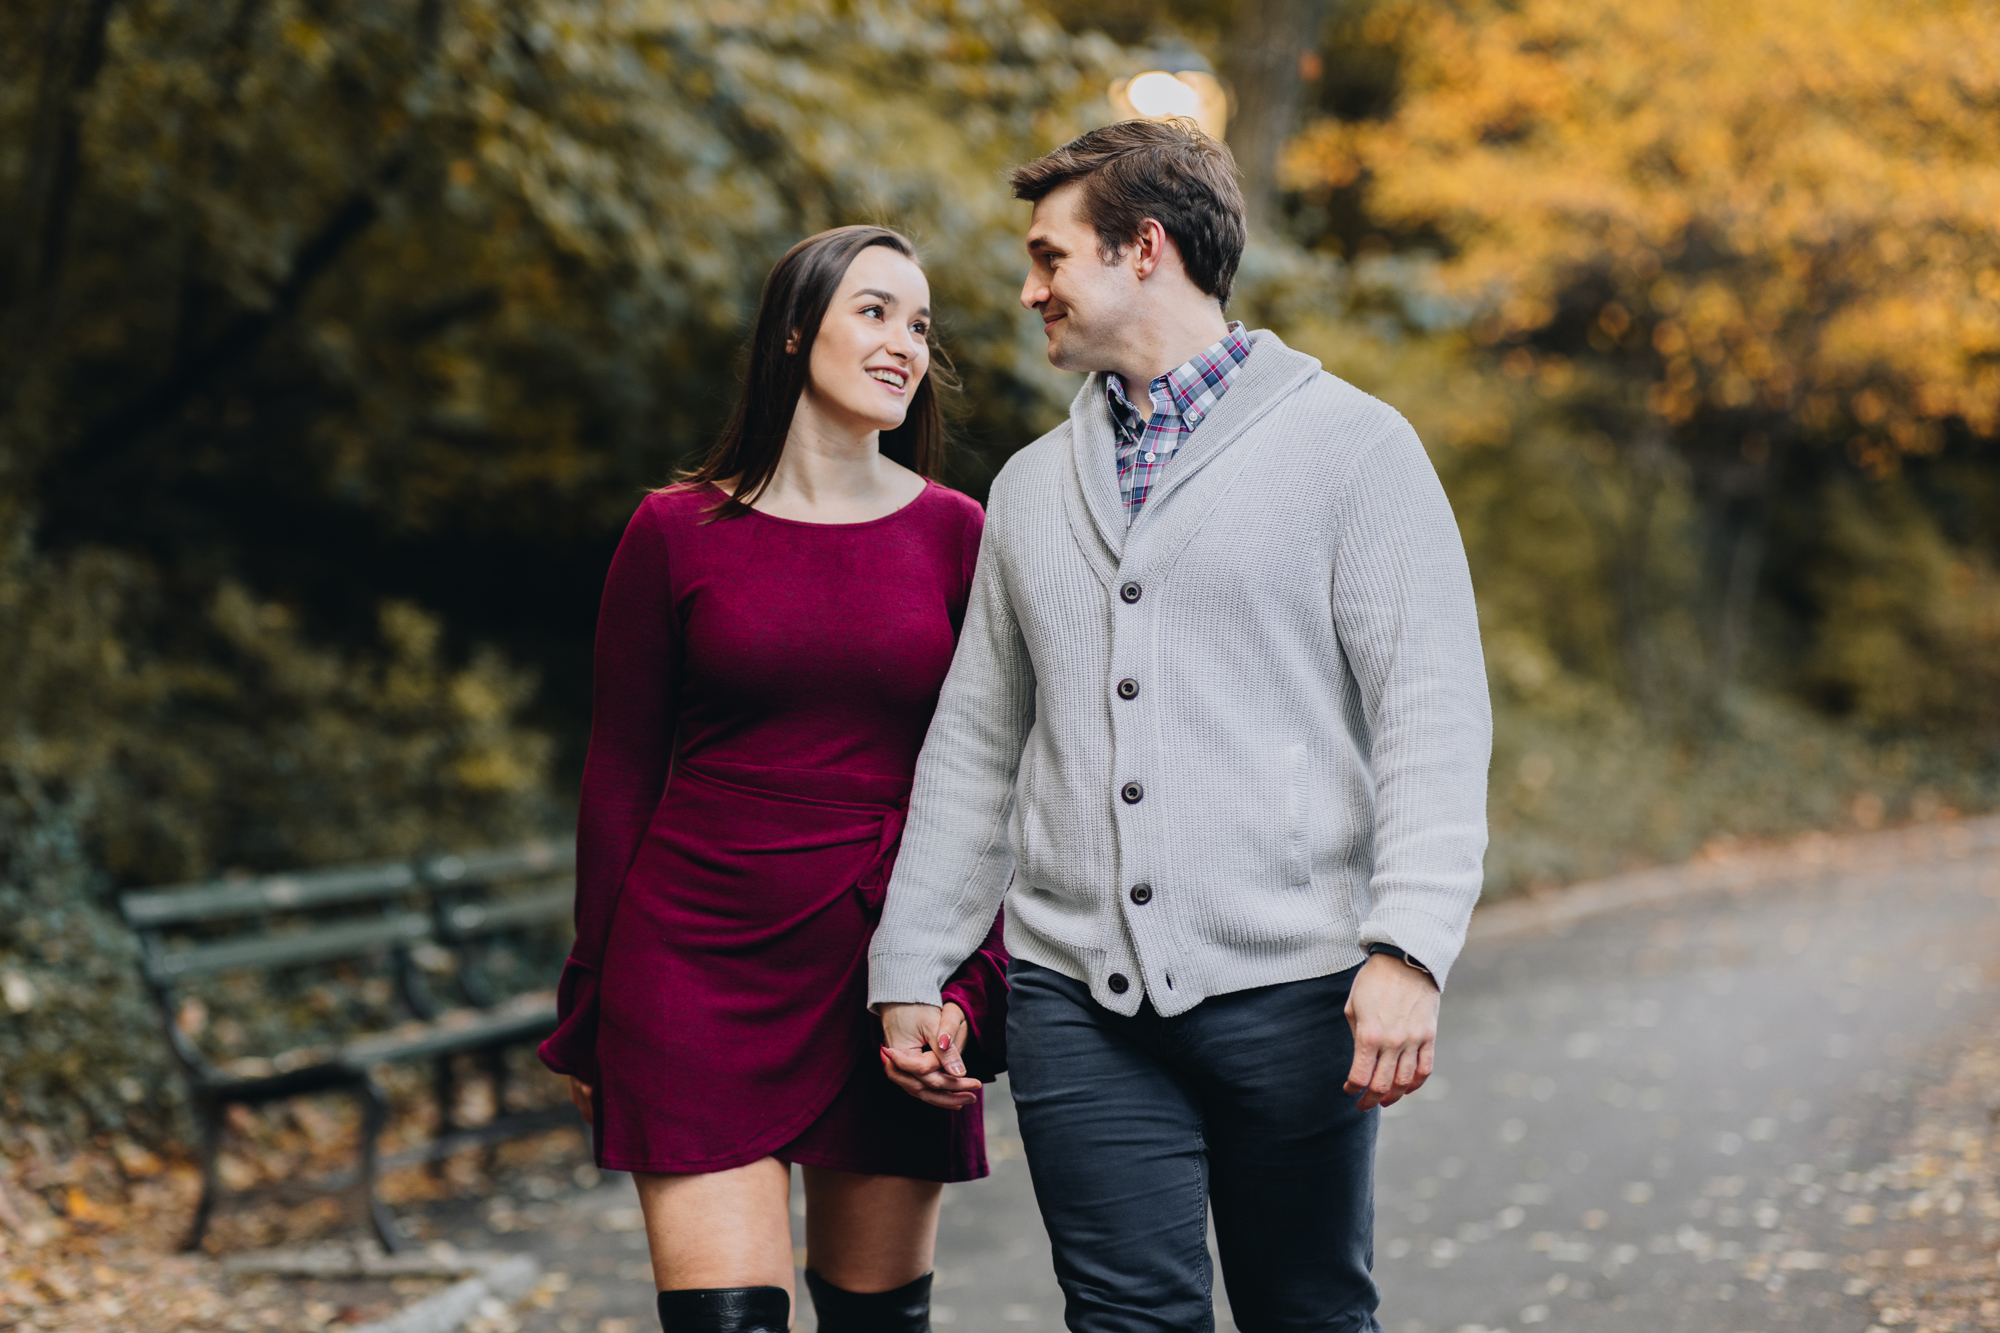 Candid Fall Engagement Photos in Central Park New York